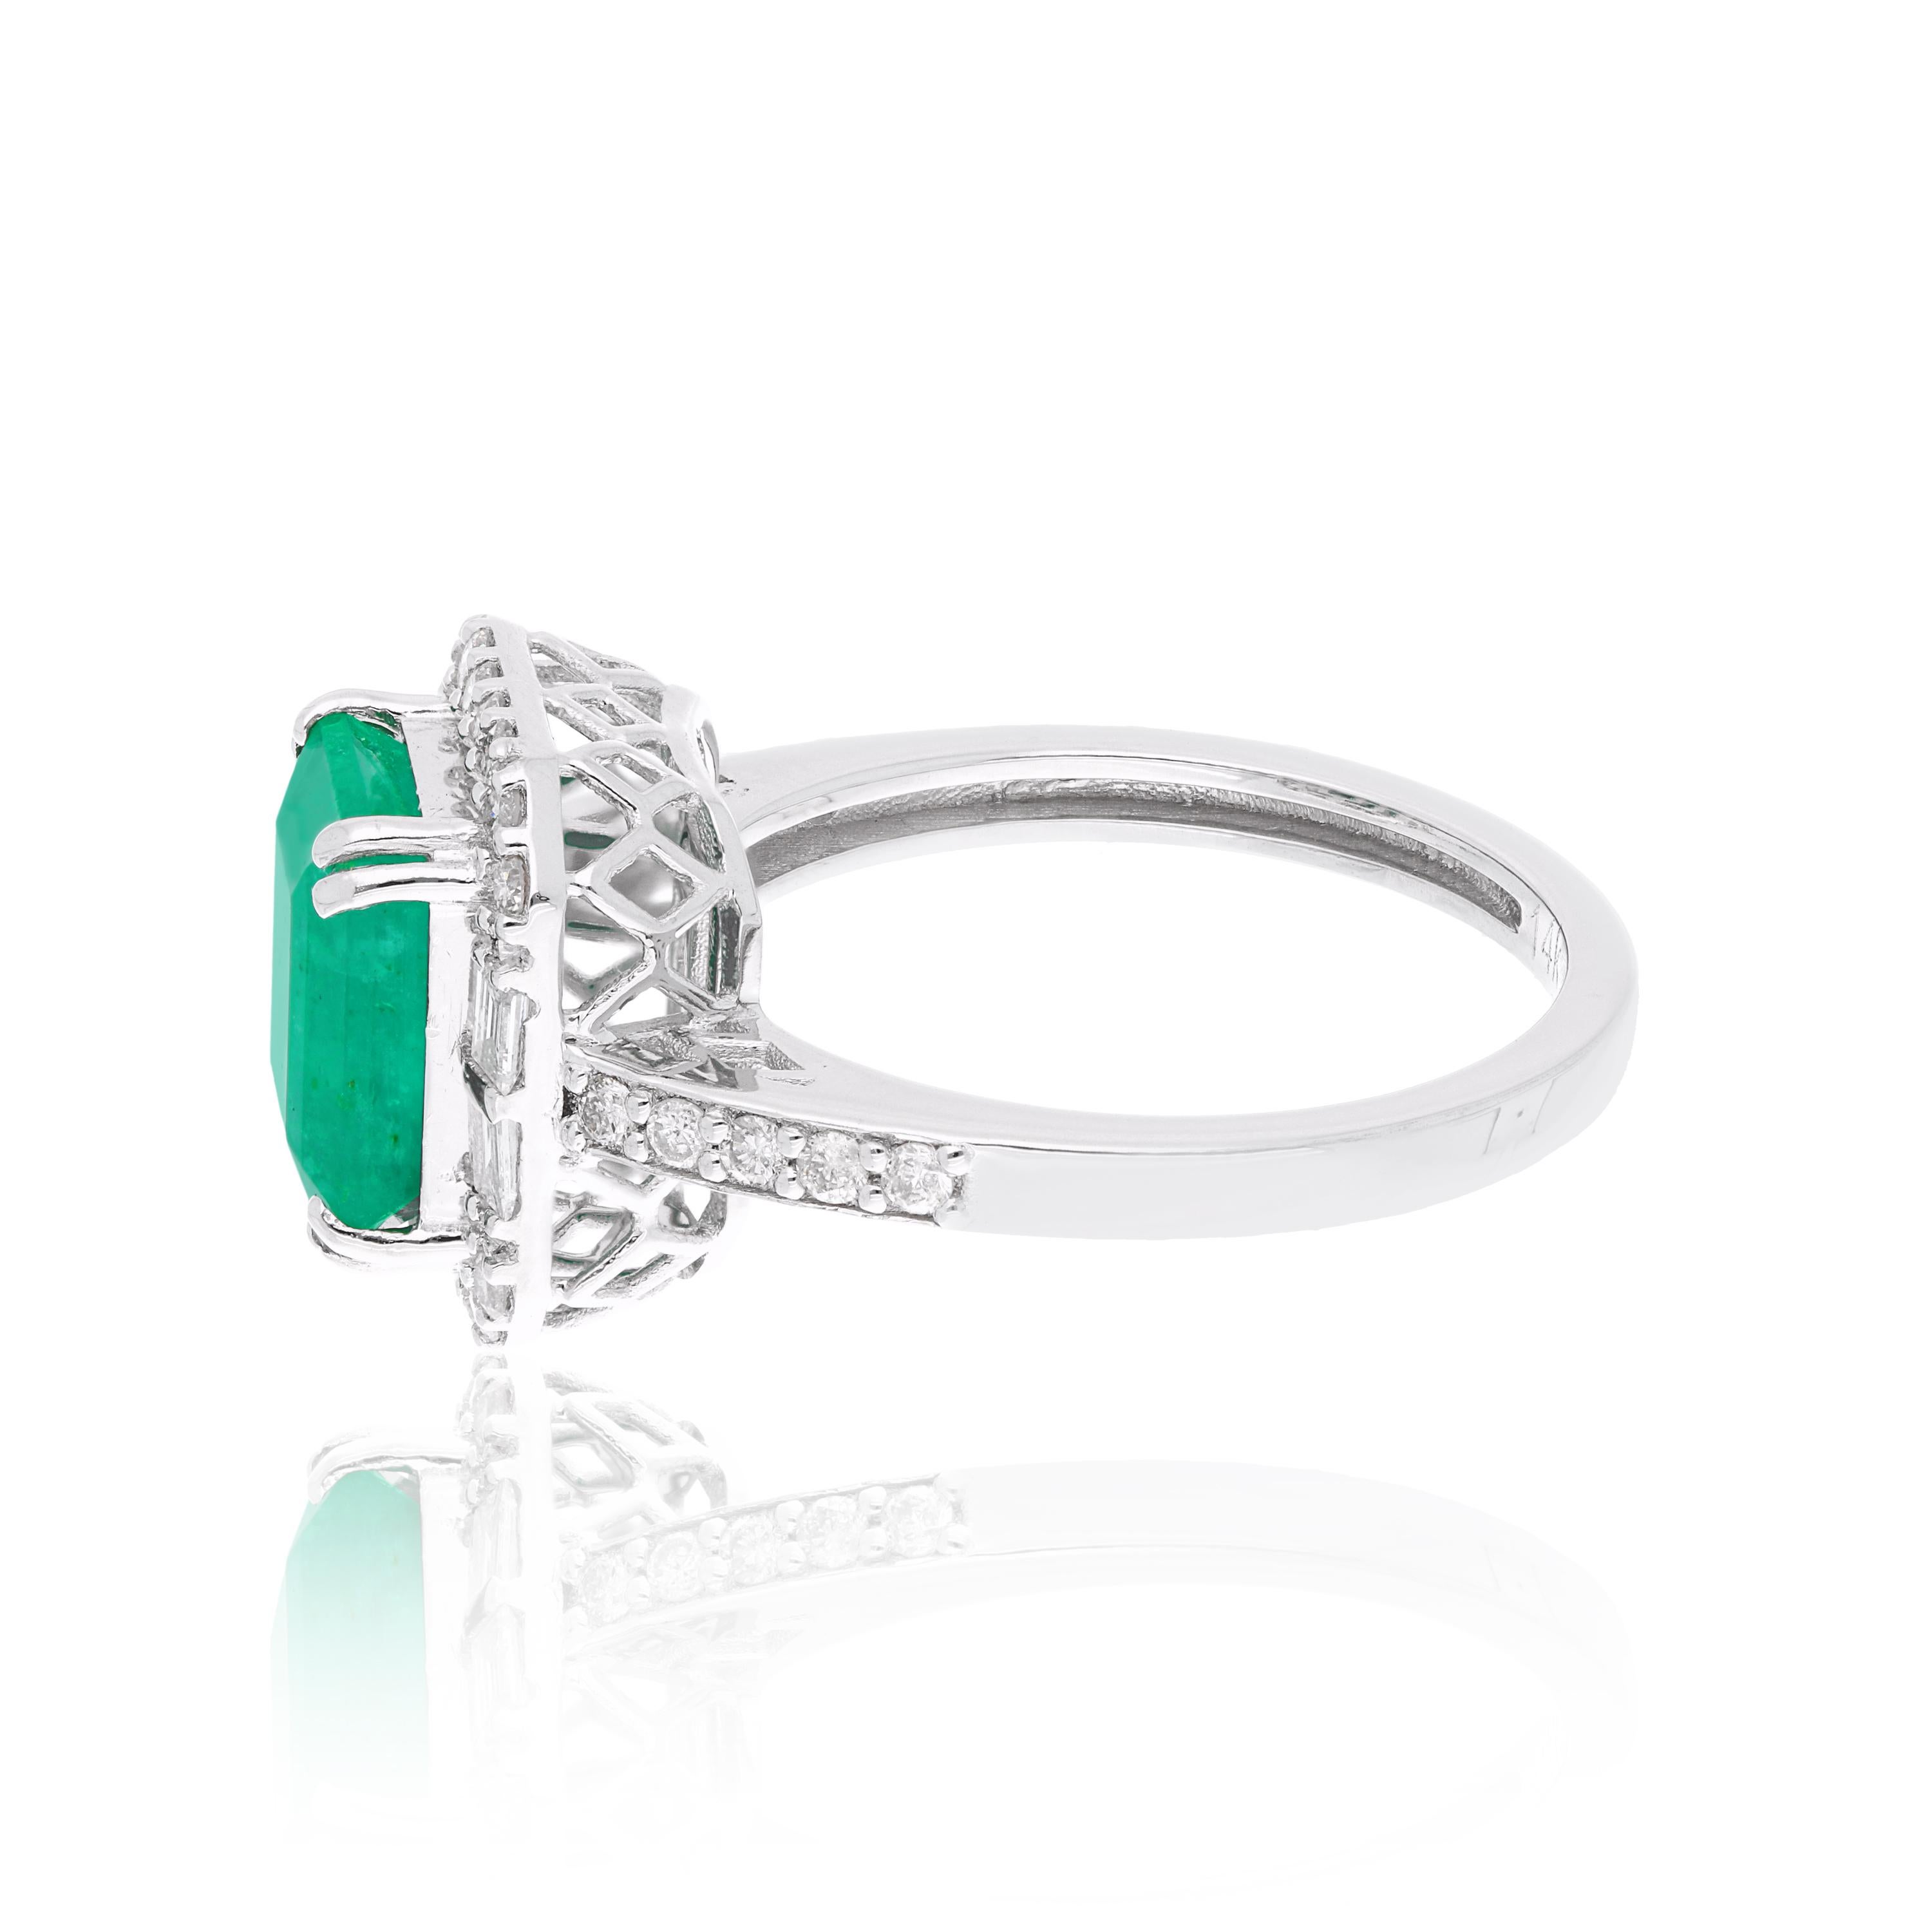 Modern Natural Emerald Gemstone Cocktail Ring Baguette Diamond 14k White Gold Jewelry For Sale